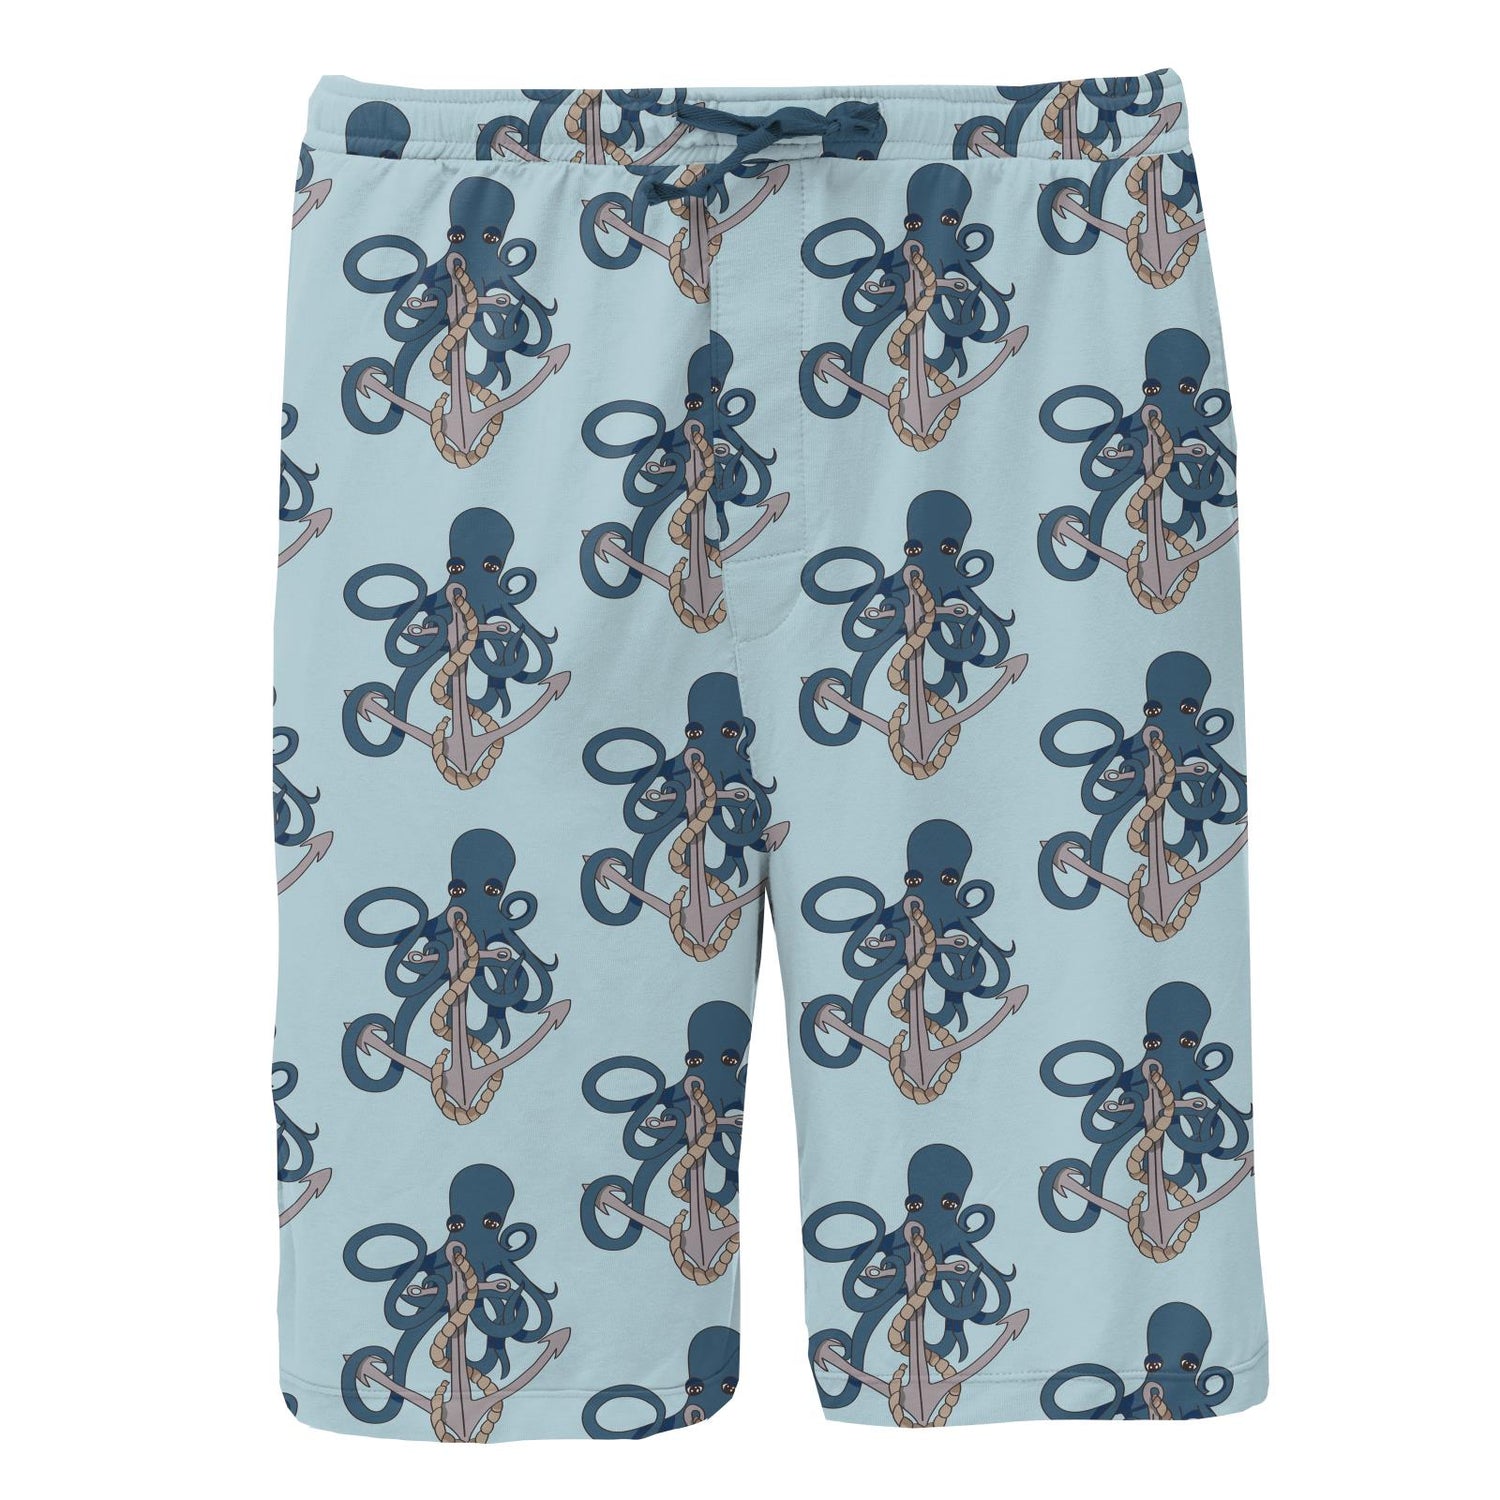 Men's Print Lounge Shorts in Spring Sky Octopus Anchor